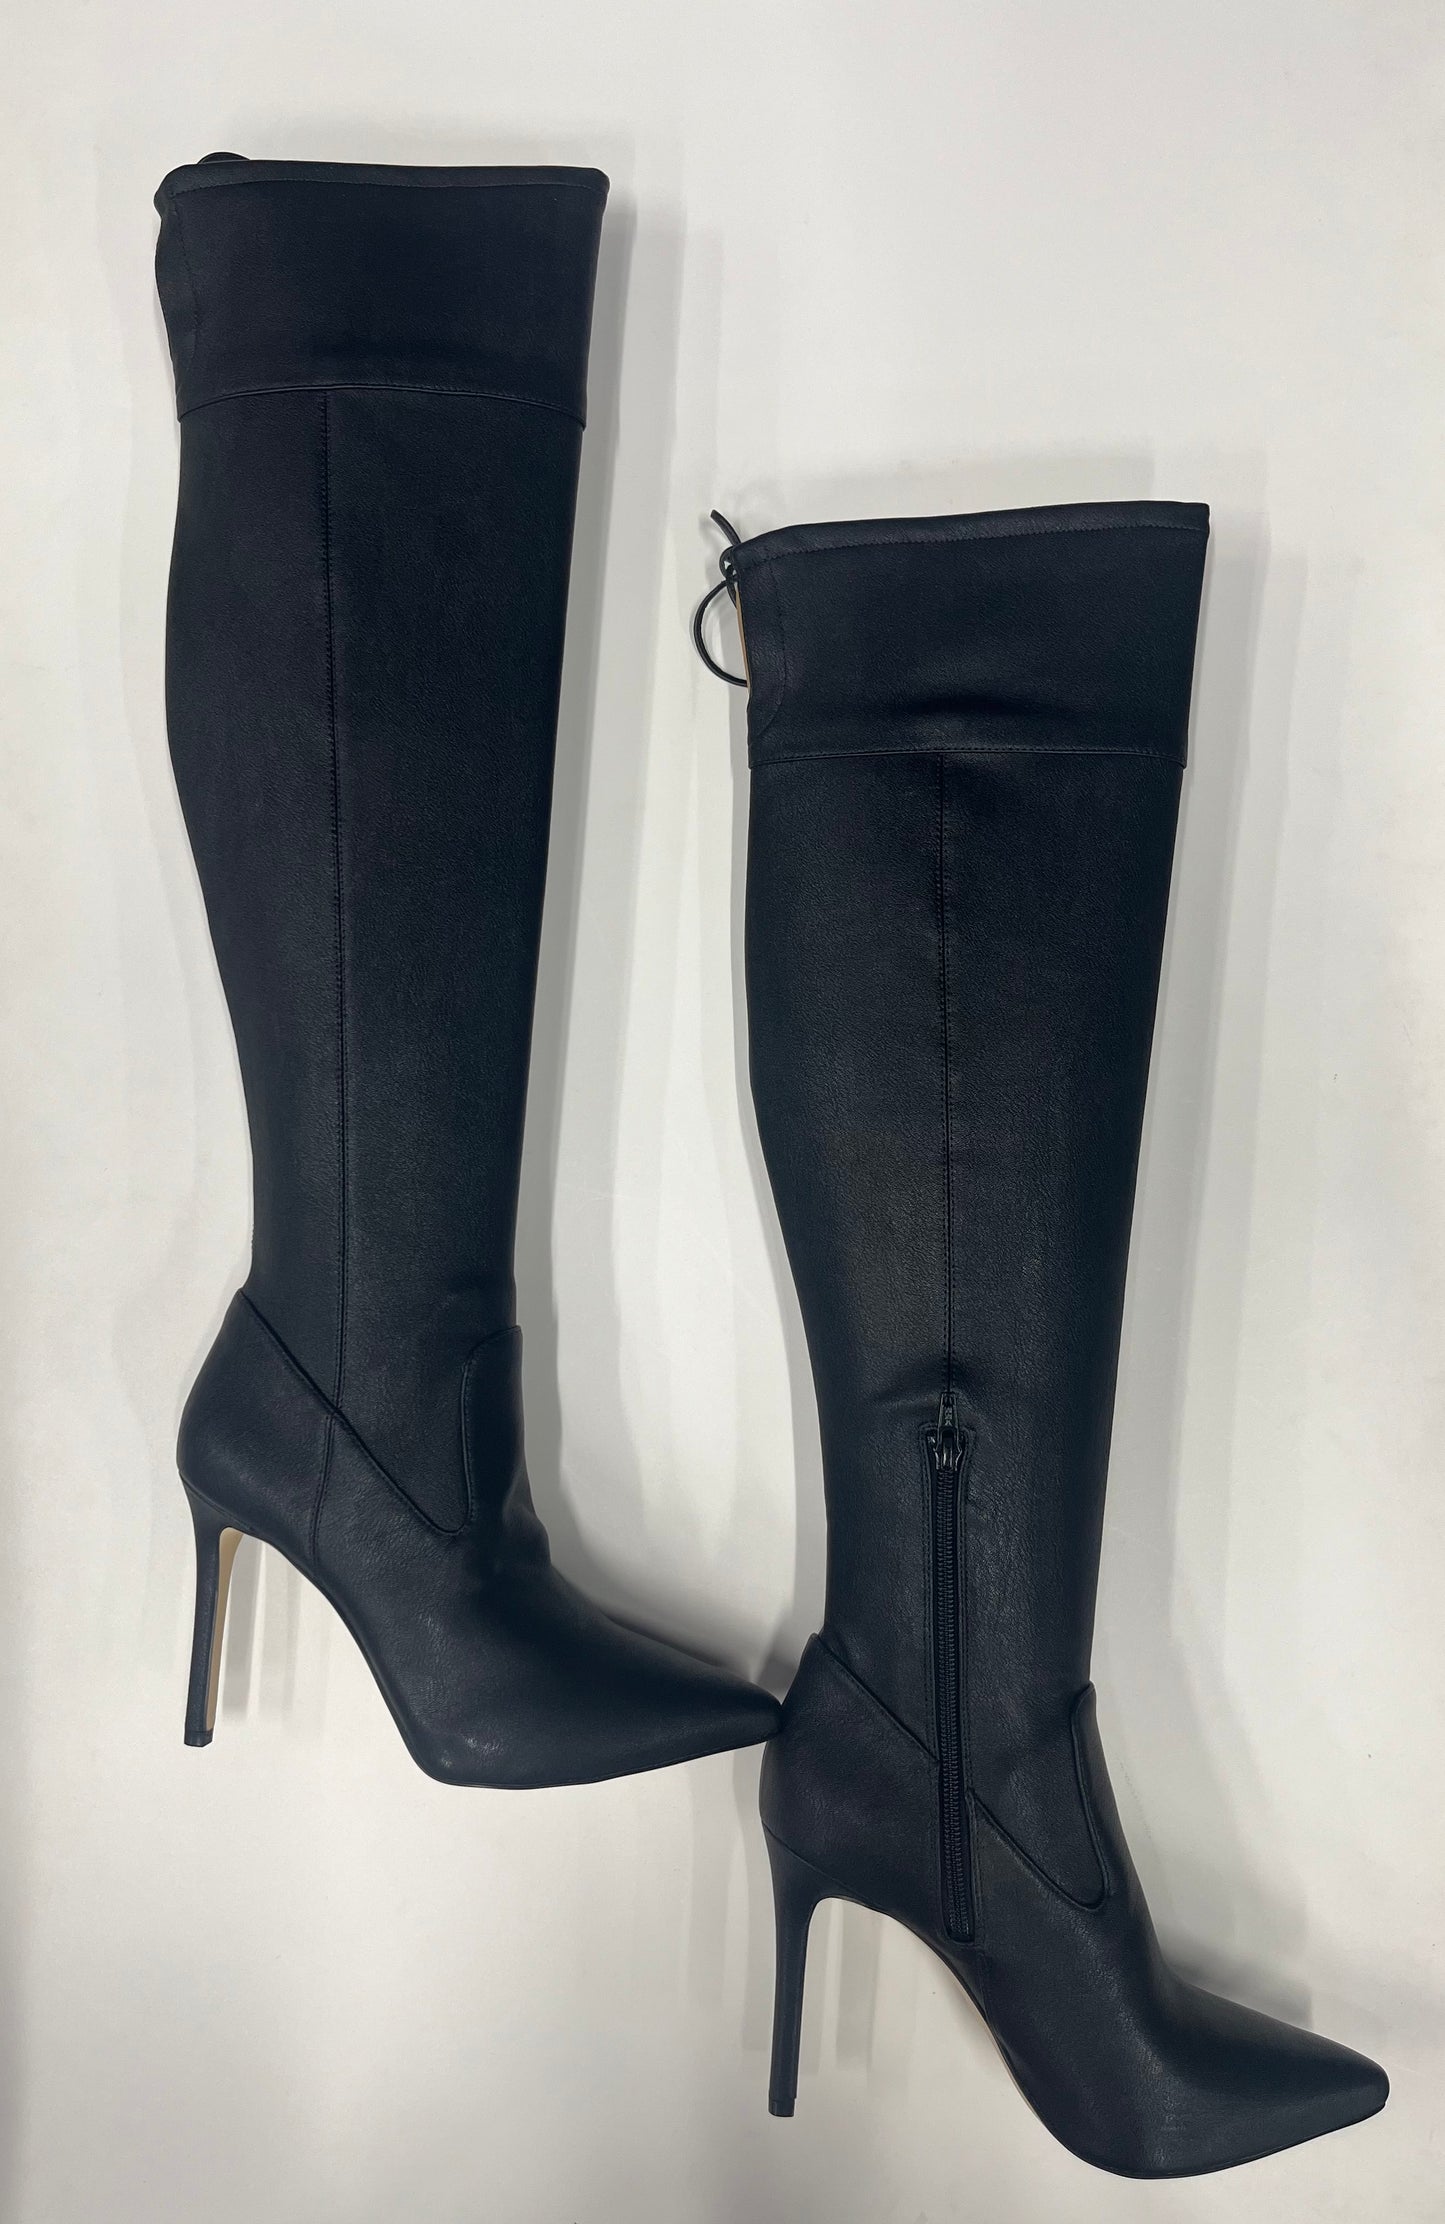 Boots Ankle Heels By Michael Kors  Size: 7.5